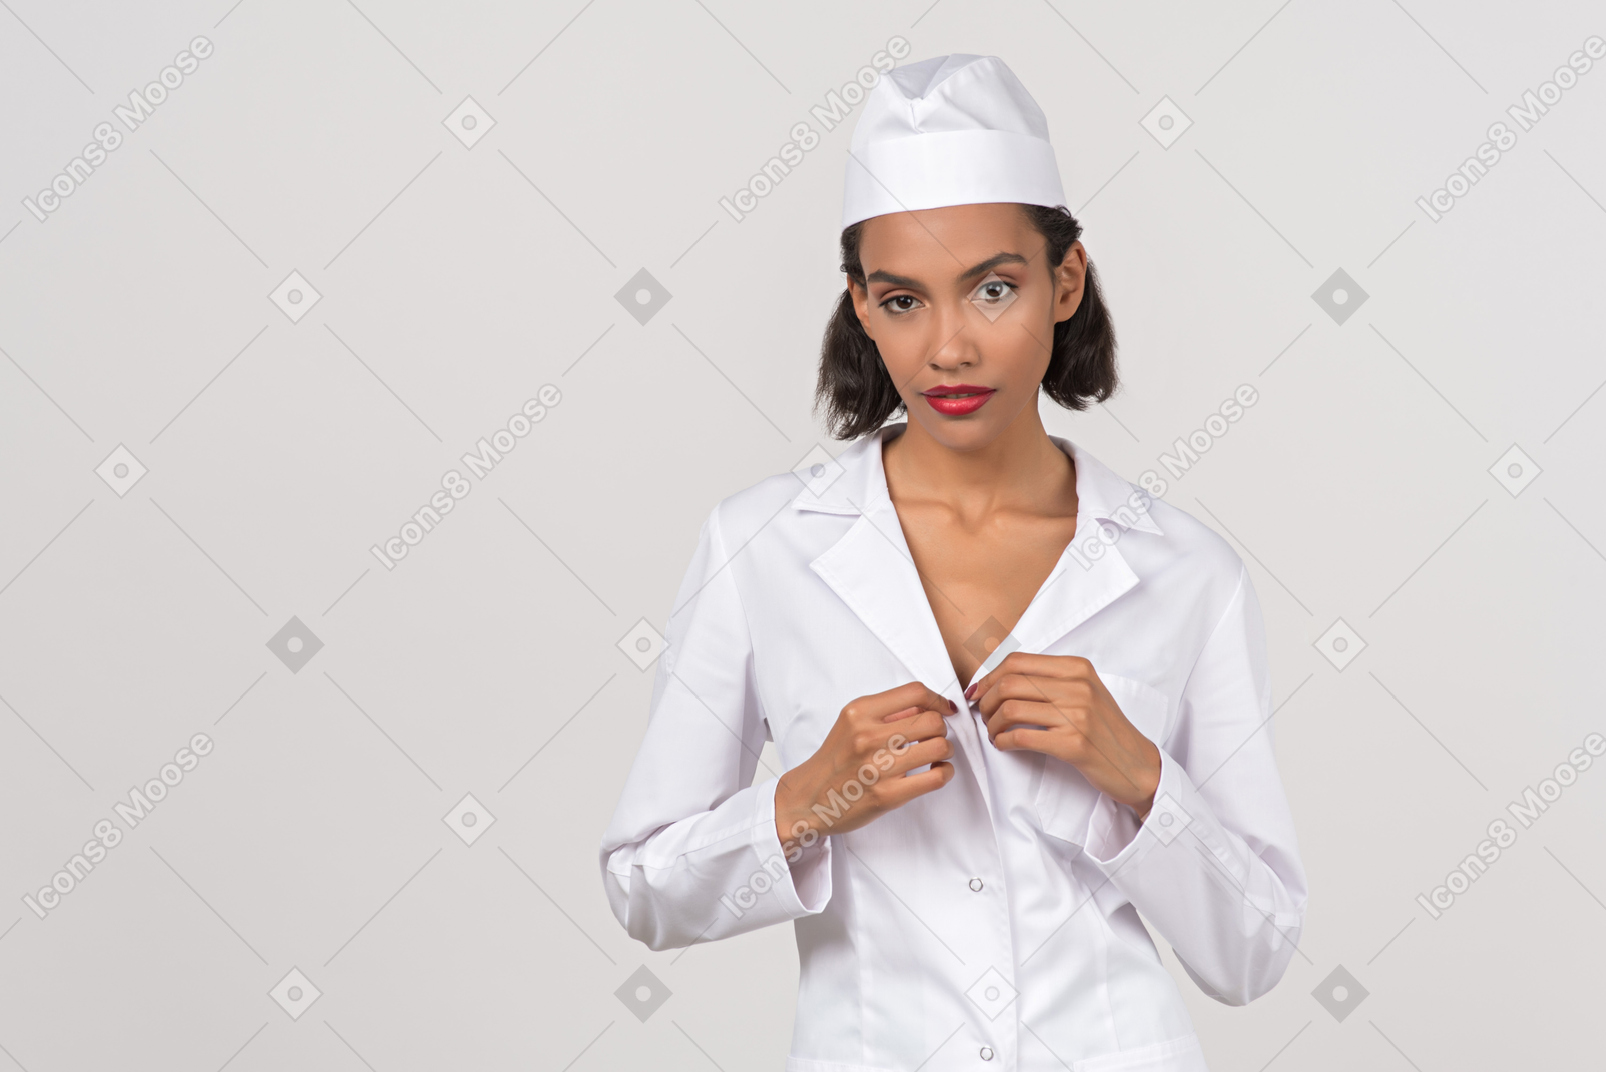 Attractive female doctor undoing button of her coat